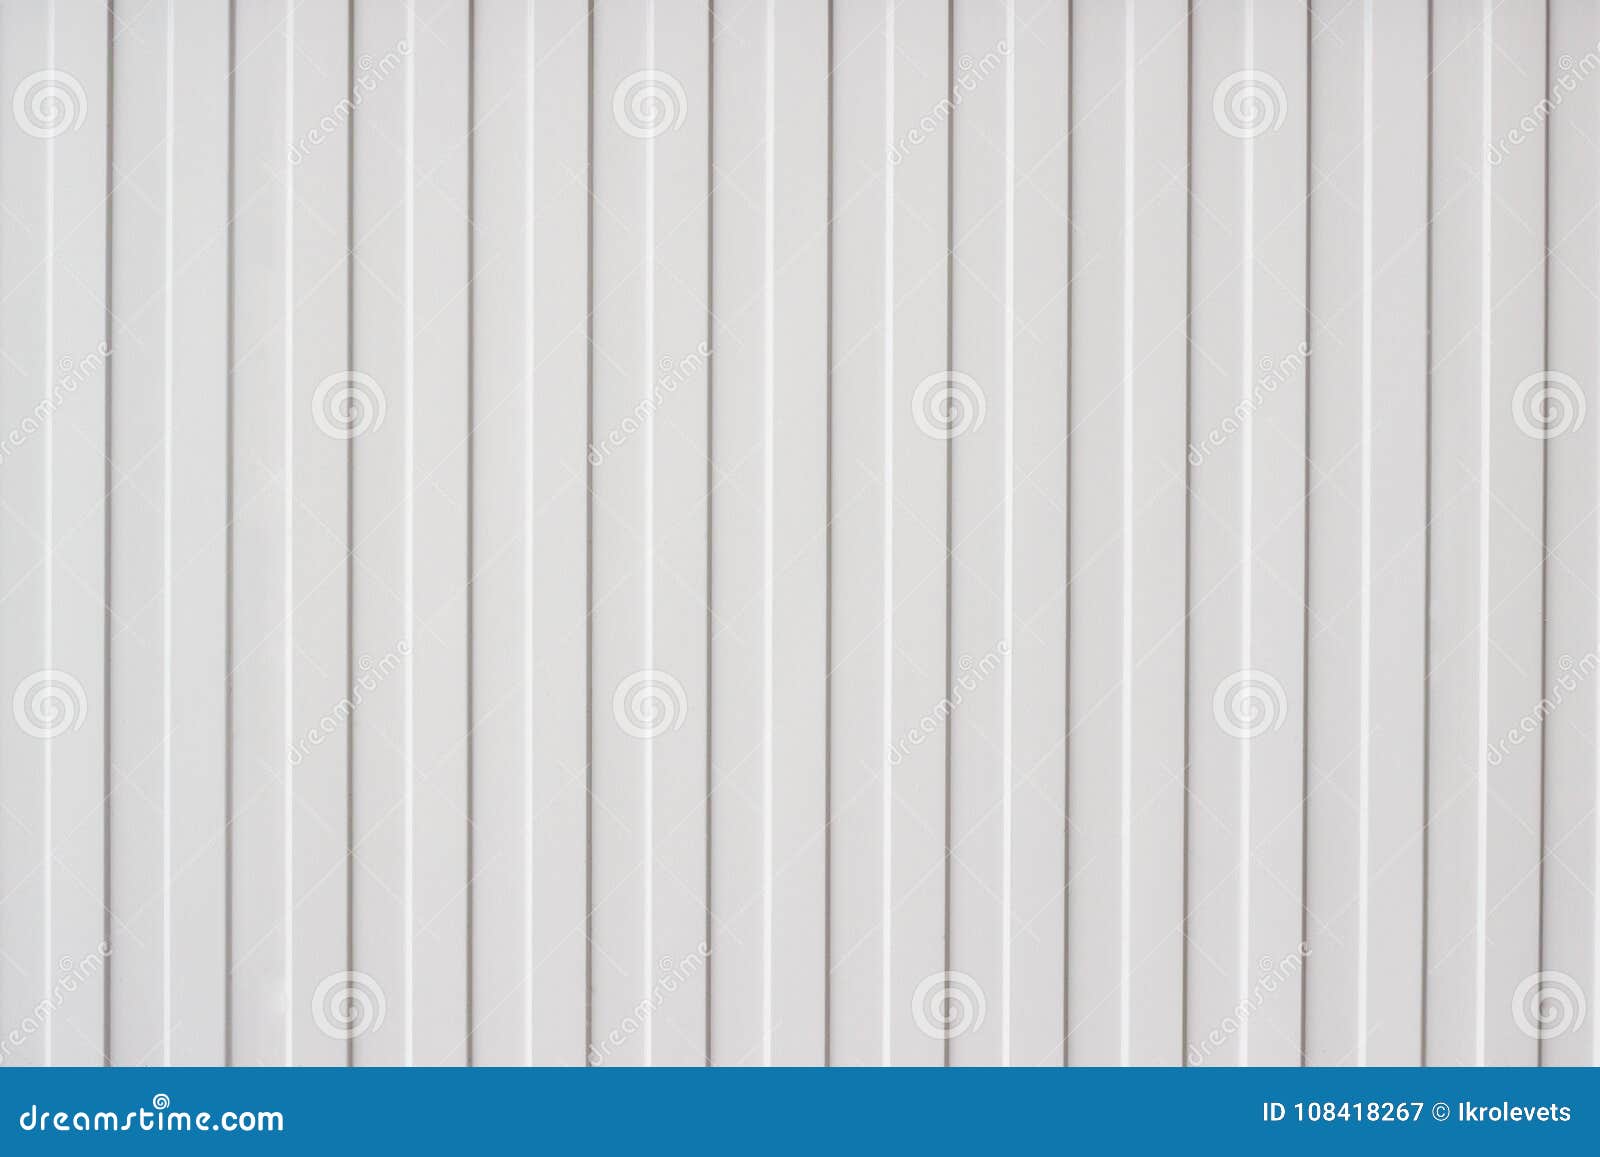 109+ Thousand Corrugated Sheet Royalty-Free Images, Stock Photos & Pictures